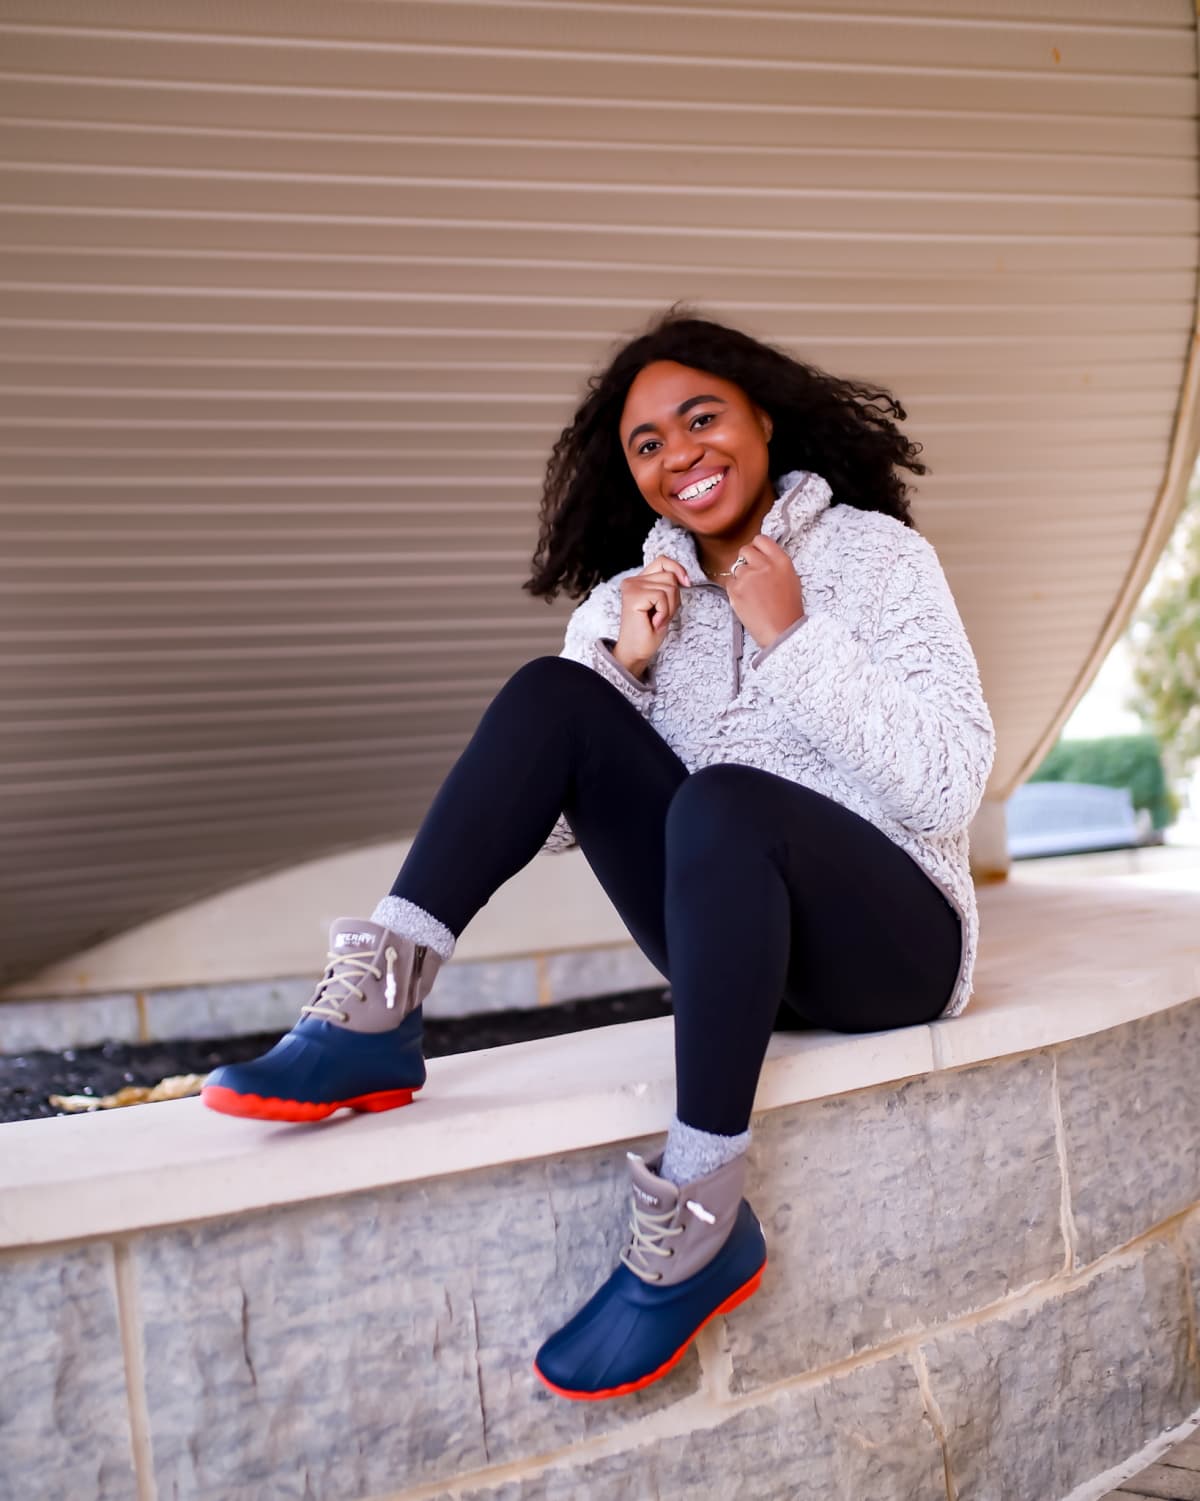 Looking for a cute Sperry duck boots outfit? The Sperry Saltwater duck boots are a top recommendation for adventure travel. Here’s how to style these versatile boots.